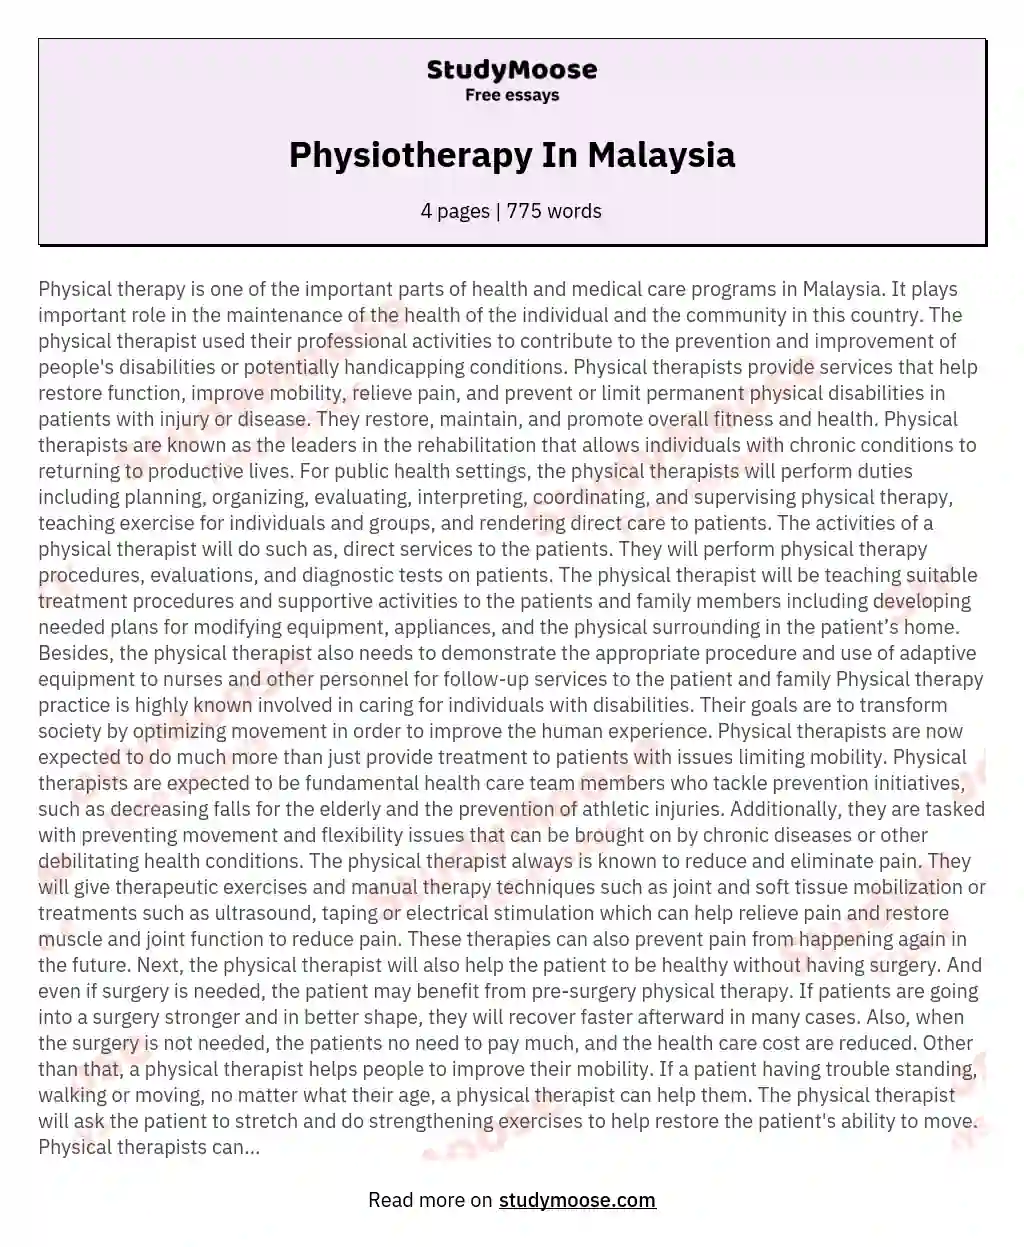 Physiotherapy In Malaysia